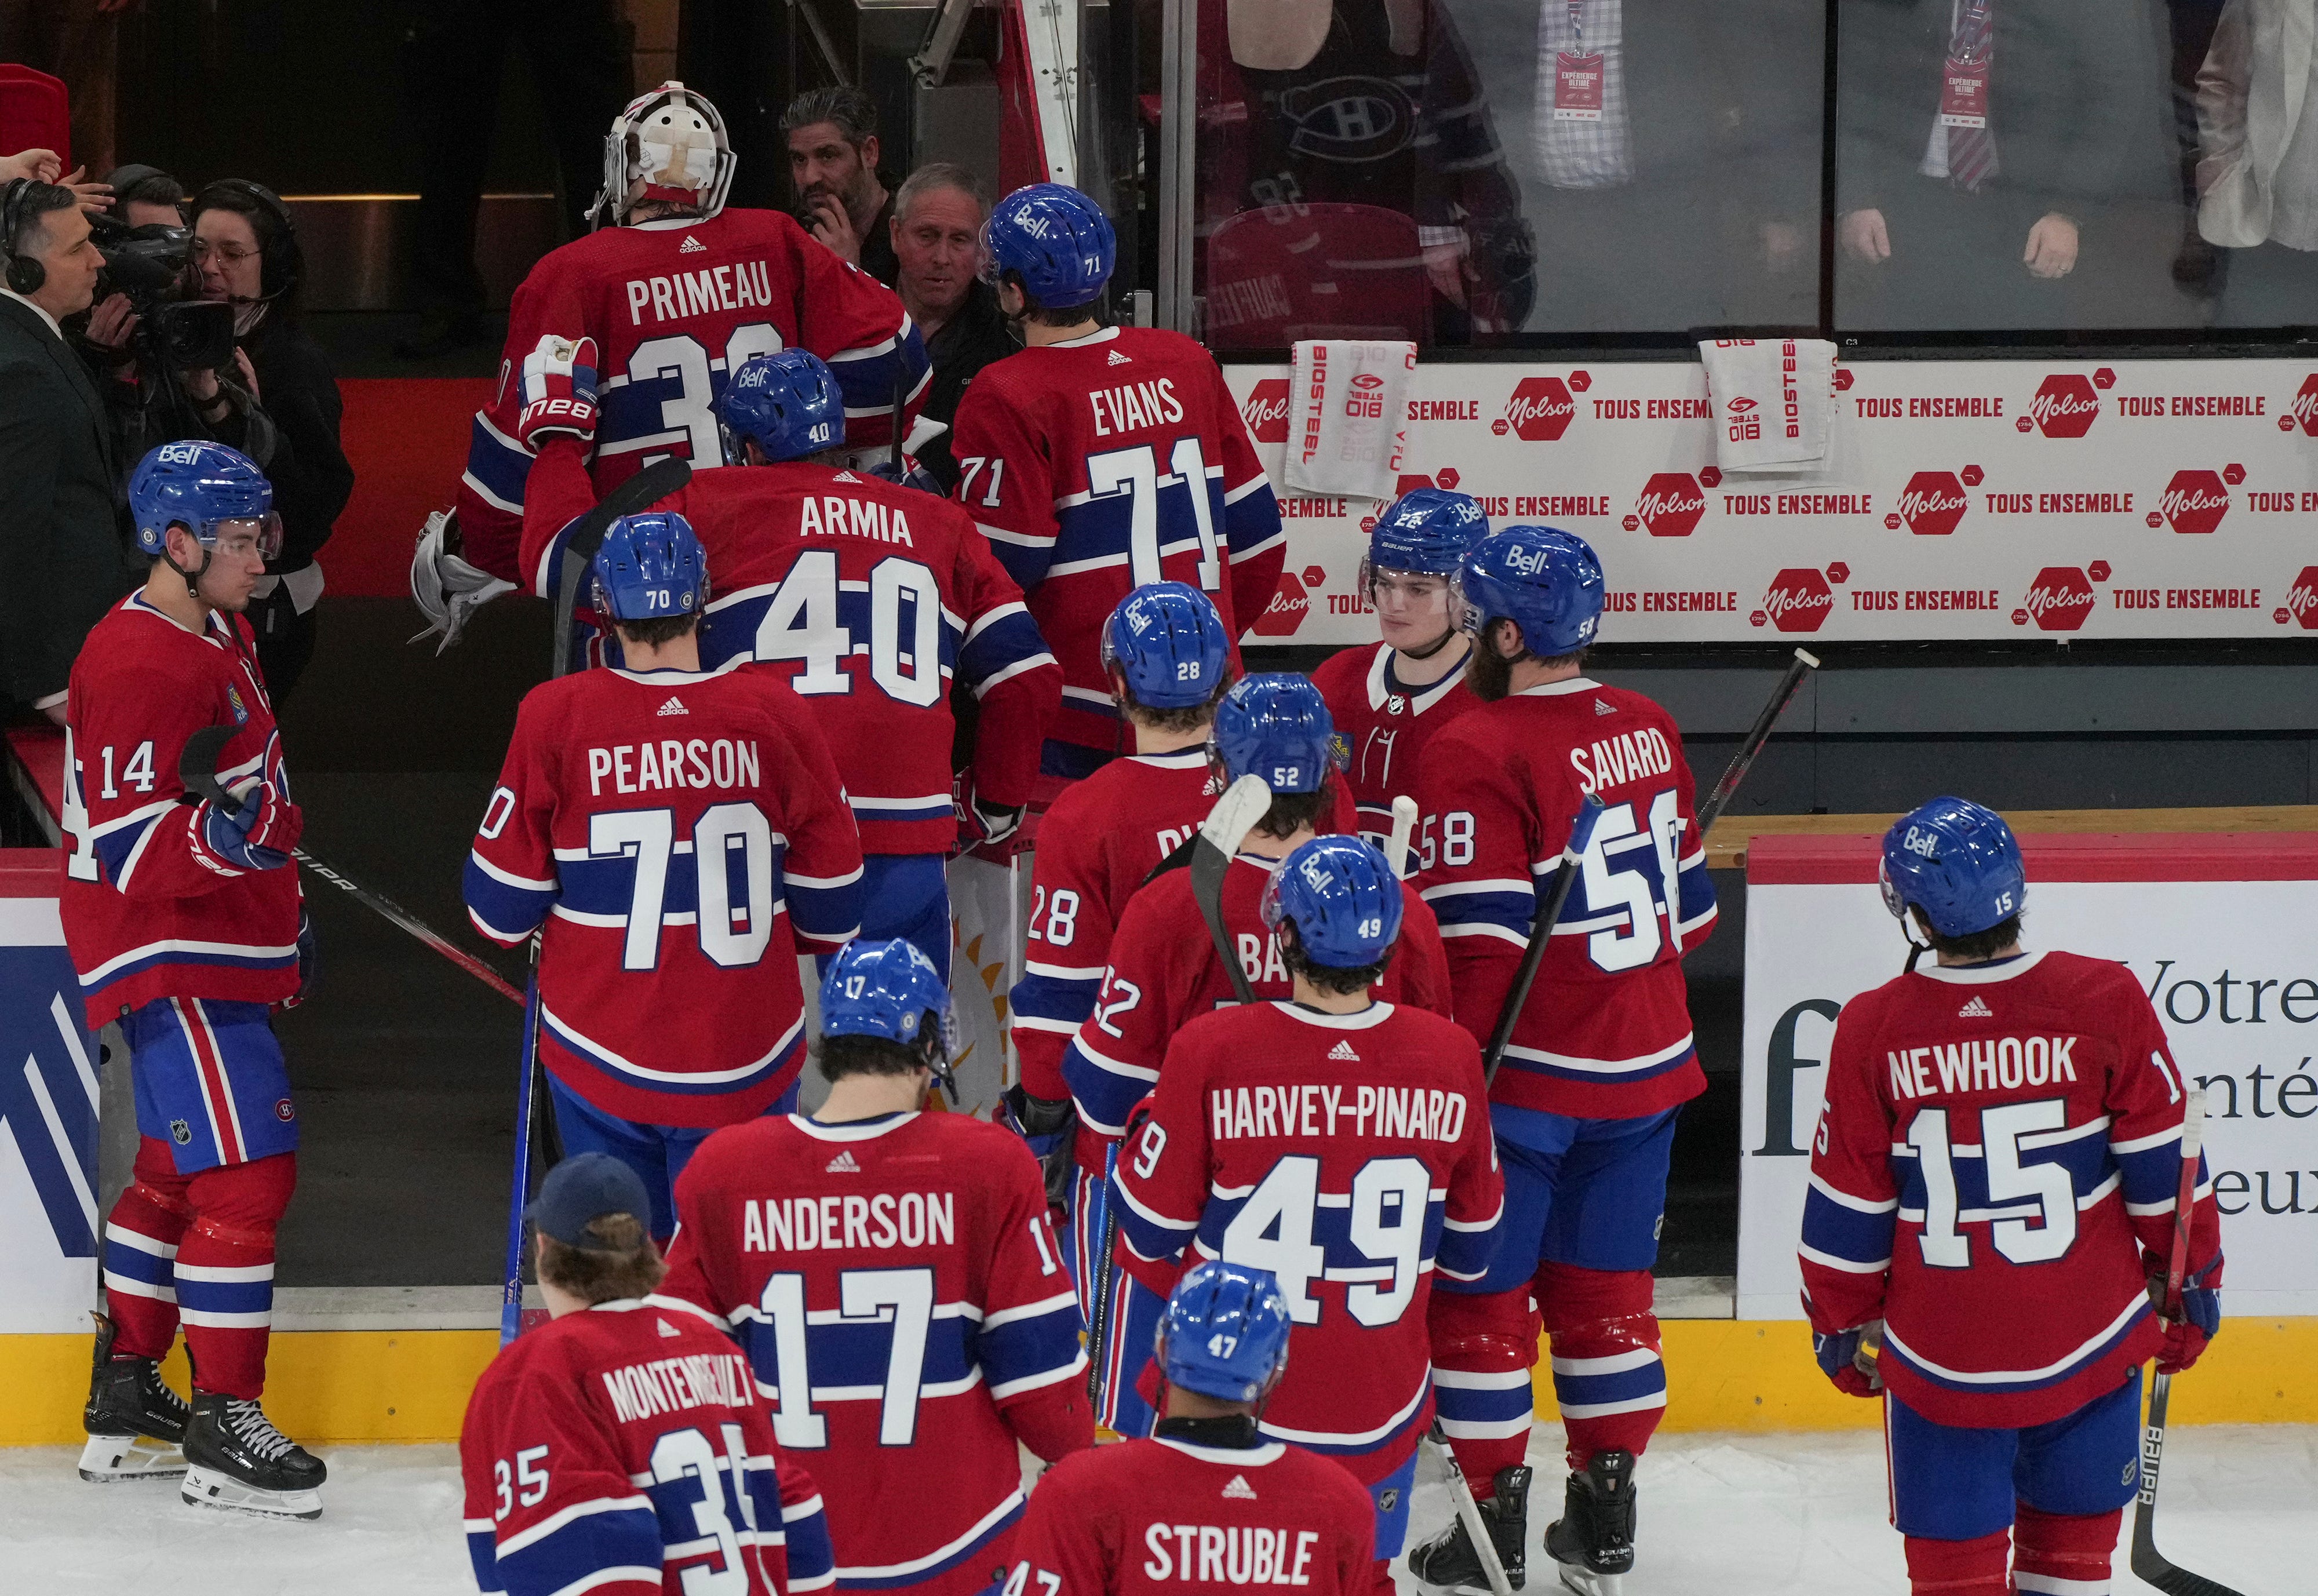 The Montreal Canadiens leave the ice following their shootout loss, 5 to 4, to the Detroit Red Wings.